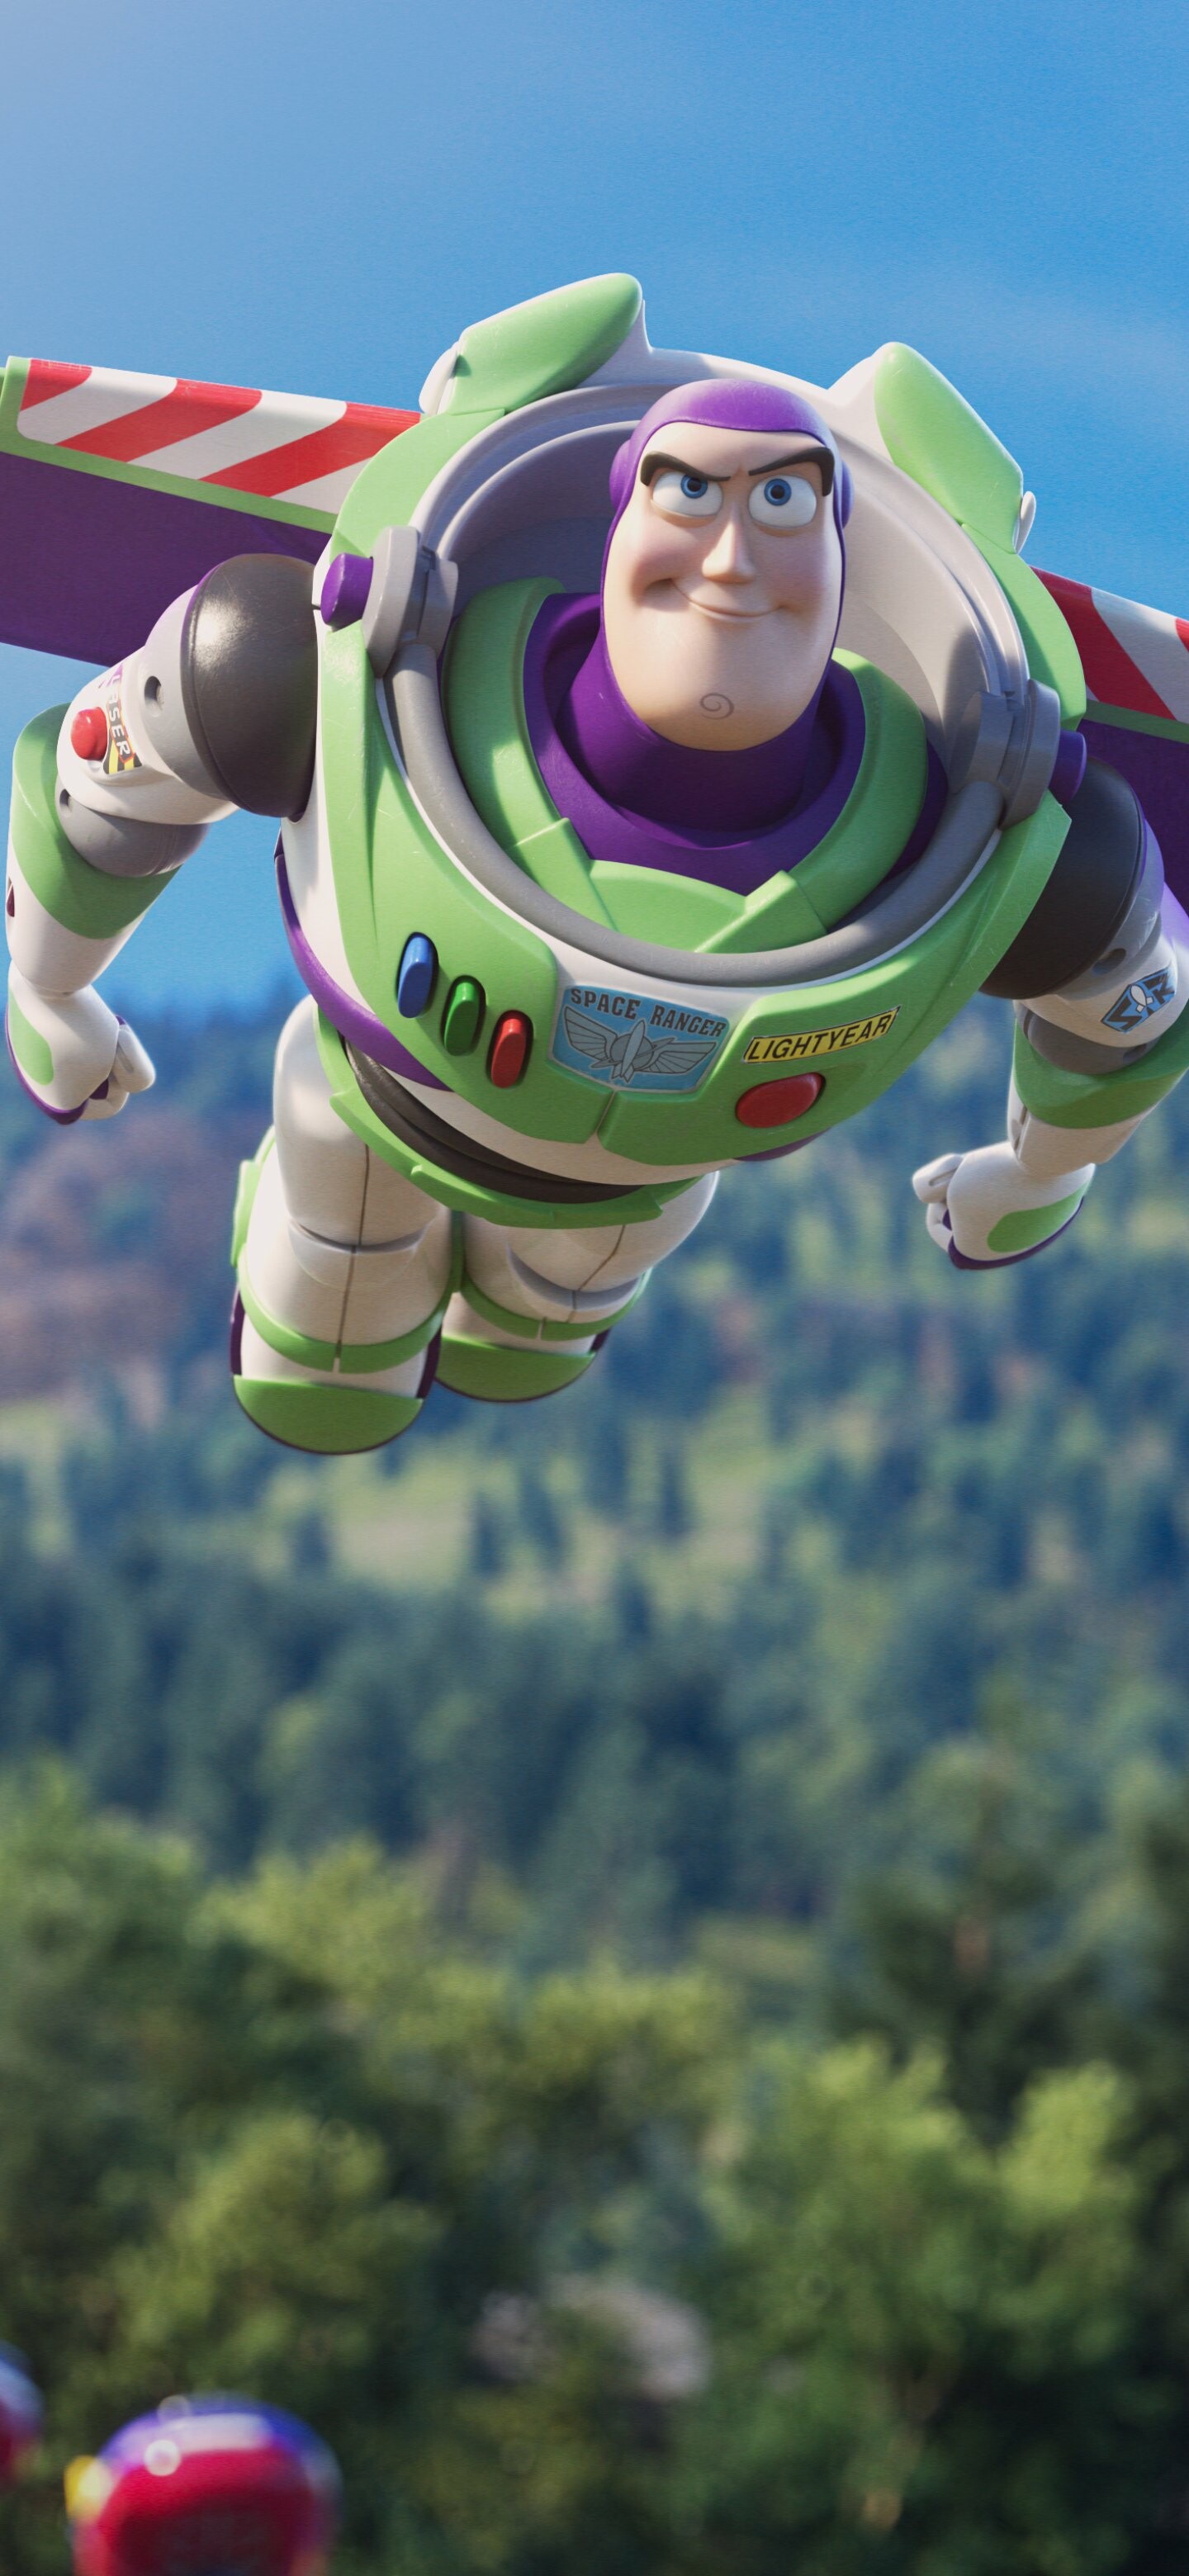 Toy Story: Buzz Lightyear, voiced by Tim Allen, acts as Woody's second-in-command. 1440x3120 HD Background.